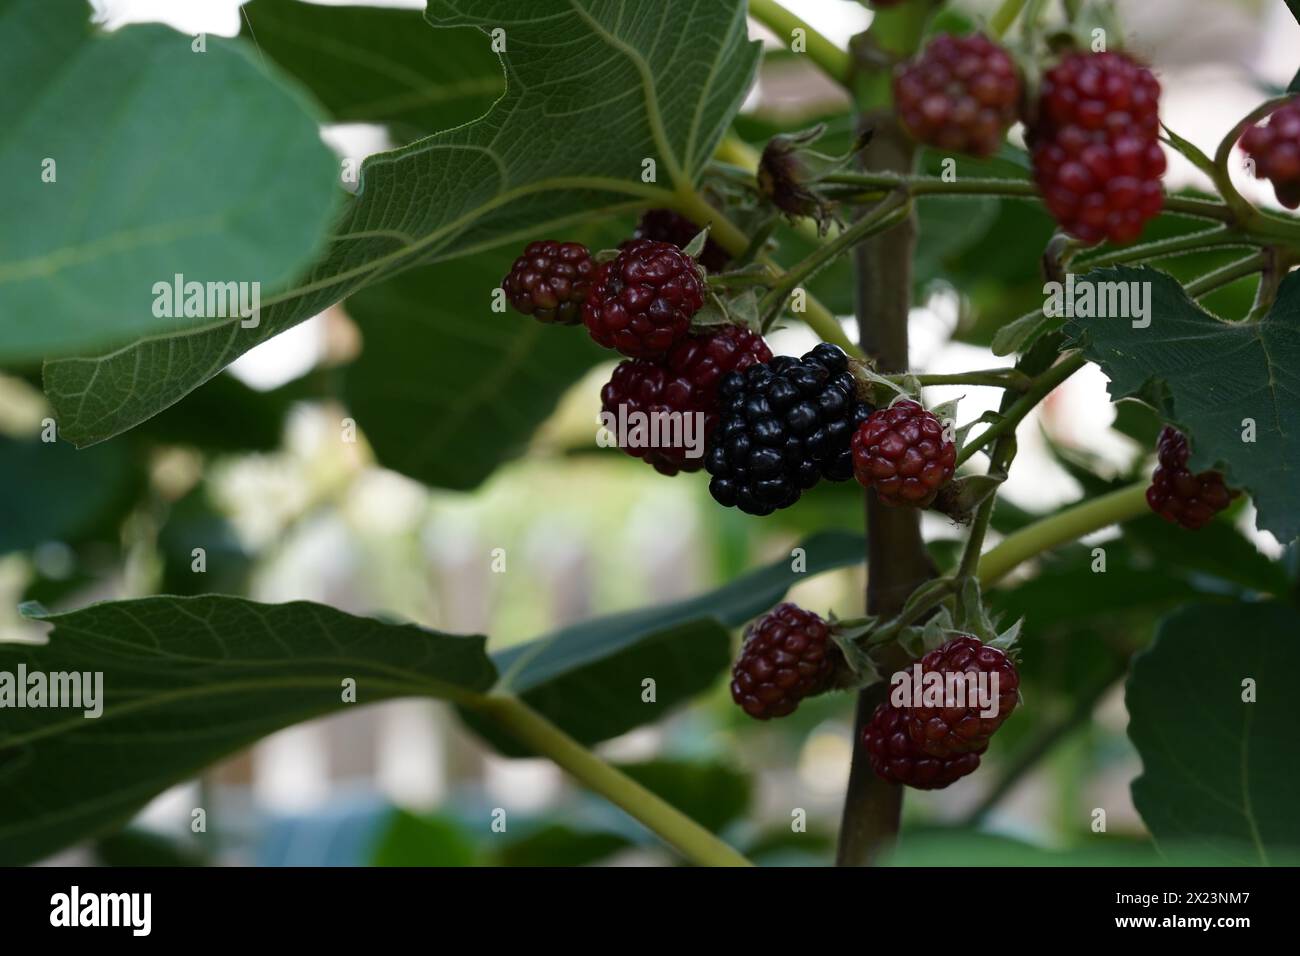 Blackberry plant, in Latin called Rubus fruticosus, with fruits in different stages of ripeness. Stock Photo